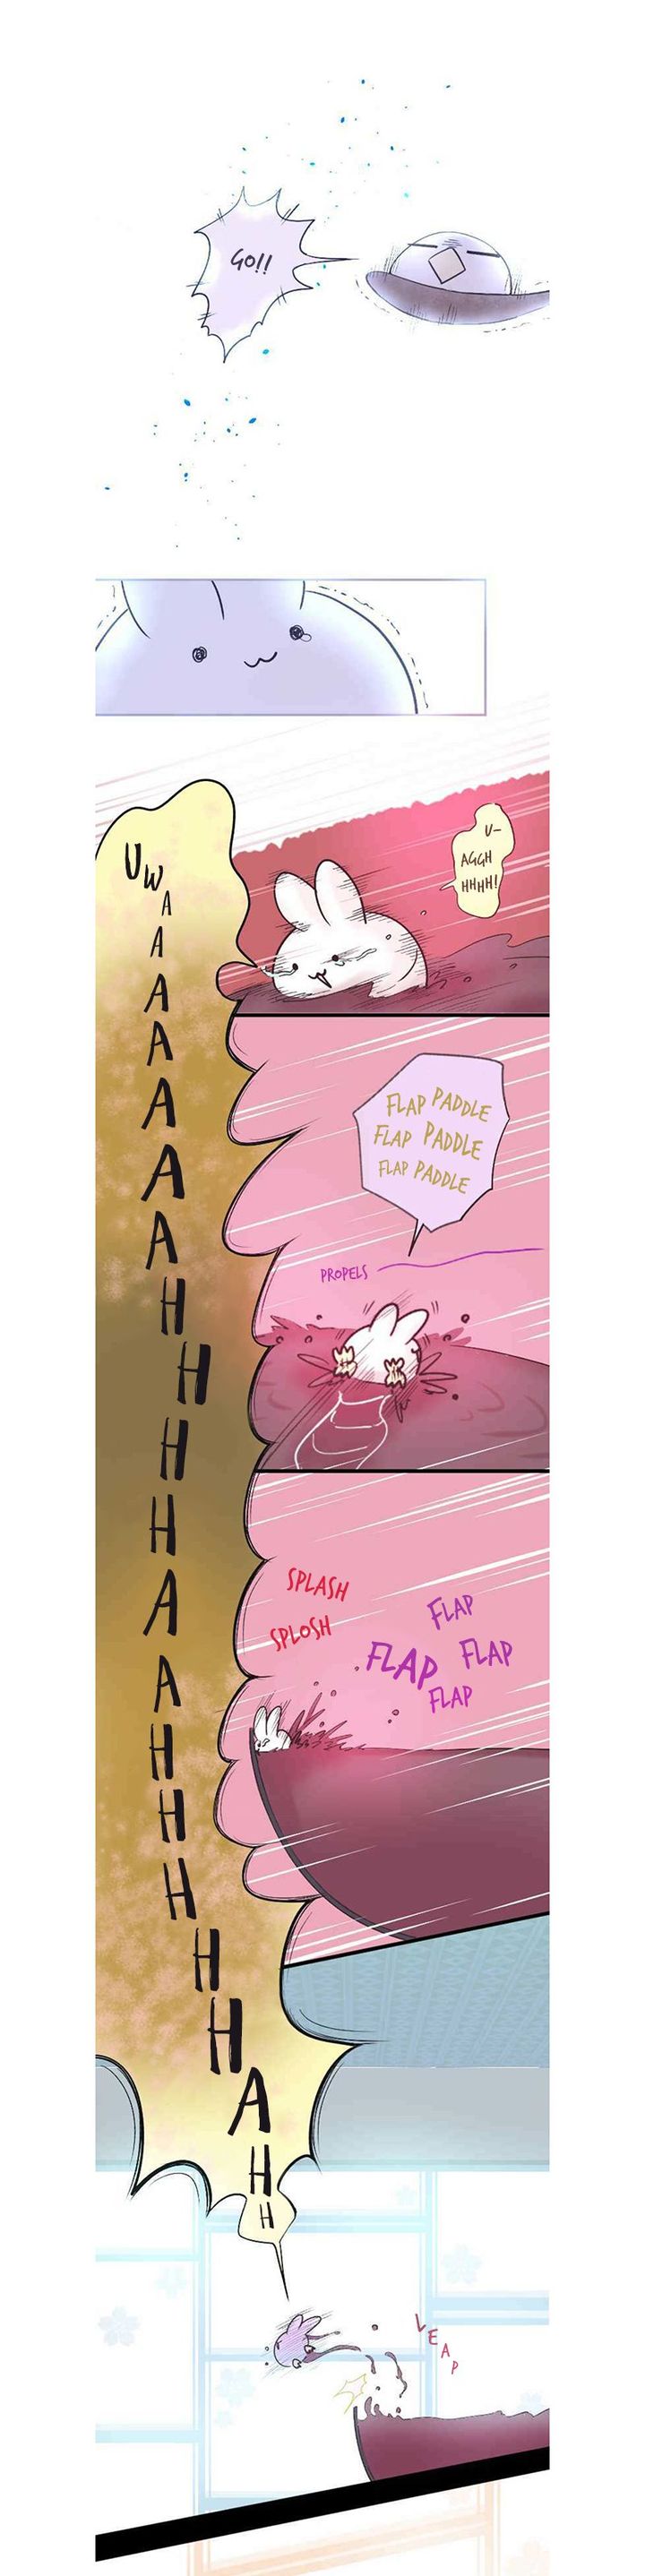 Let Me Eat You Chapter 8 Page 9